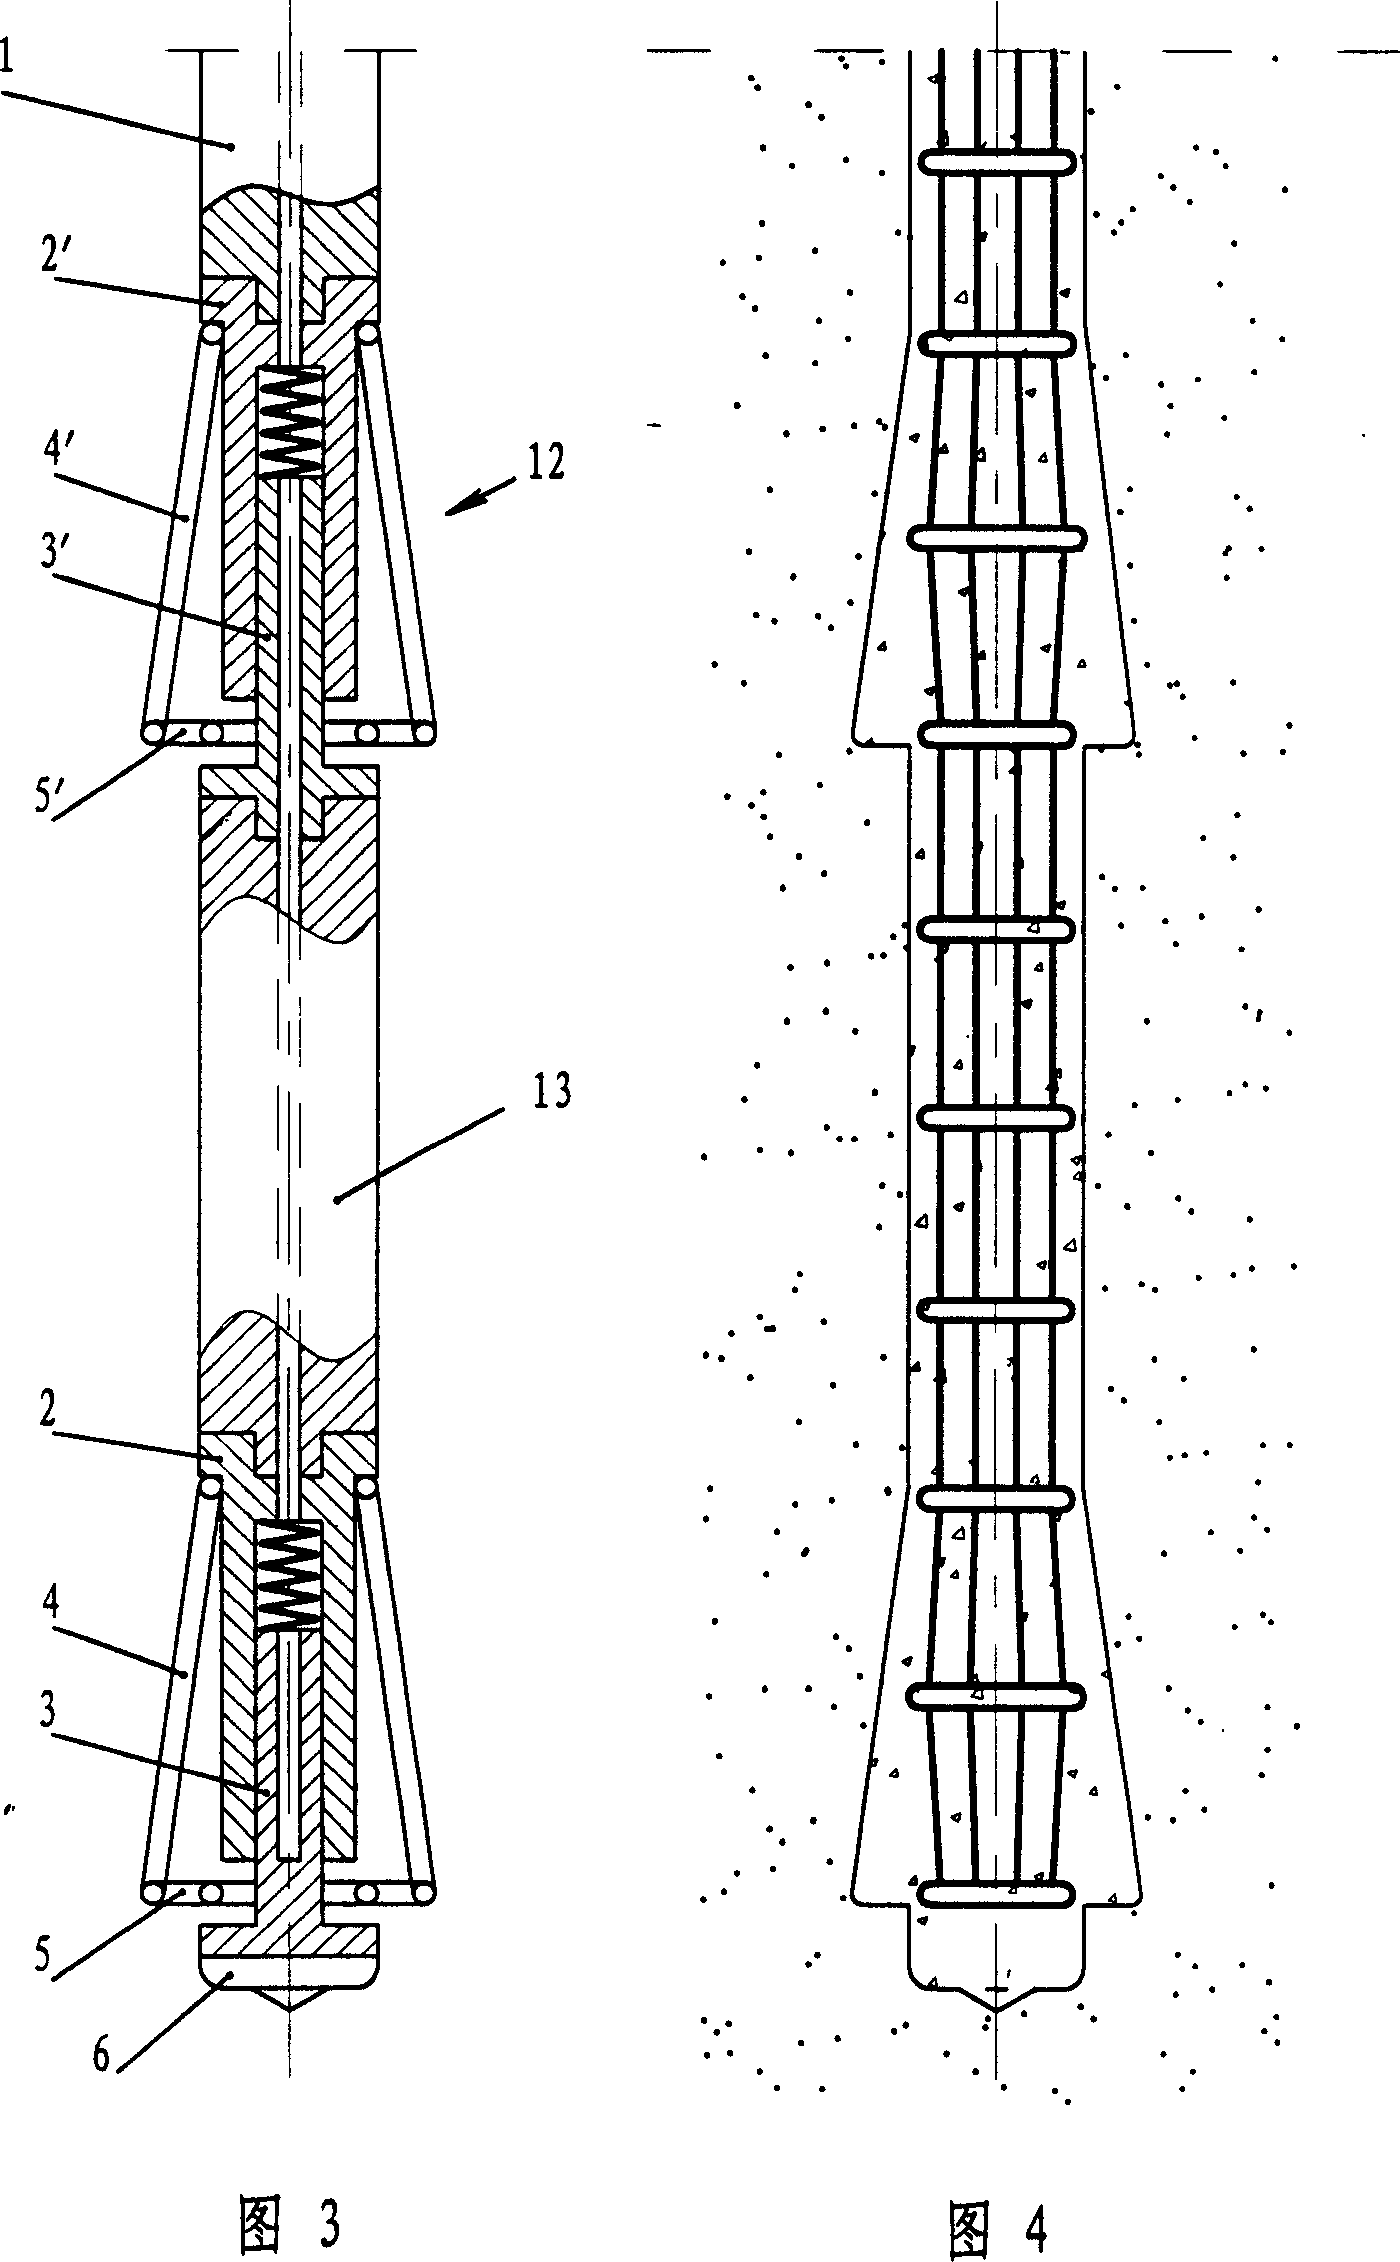 Construction method for mechanical hole reaming of anchor rod